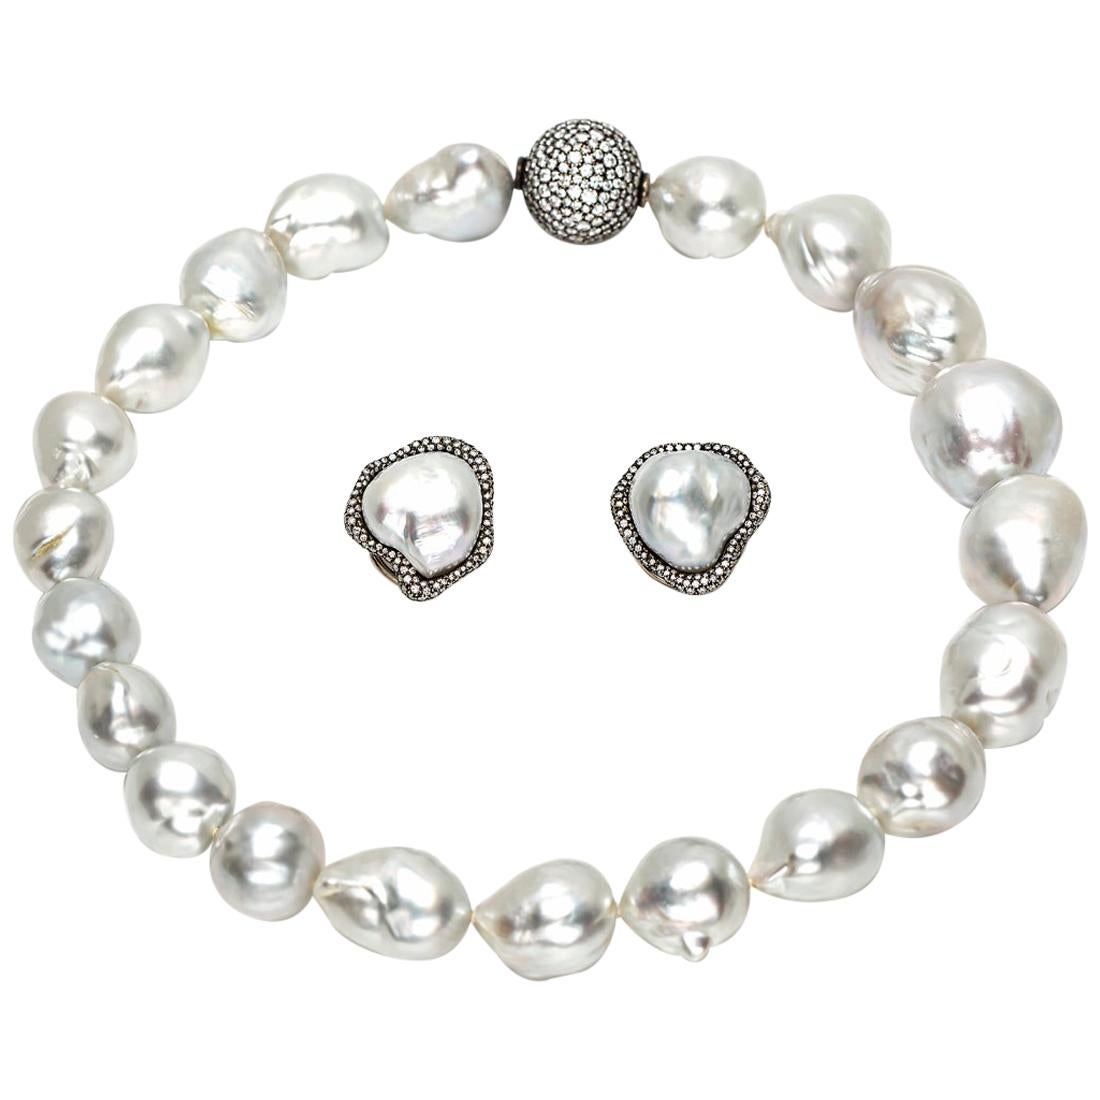 Diamond and South Sea Pearl Necklace and Earrings For Sale